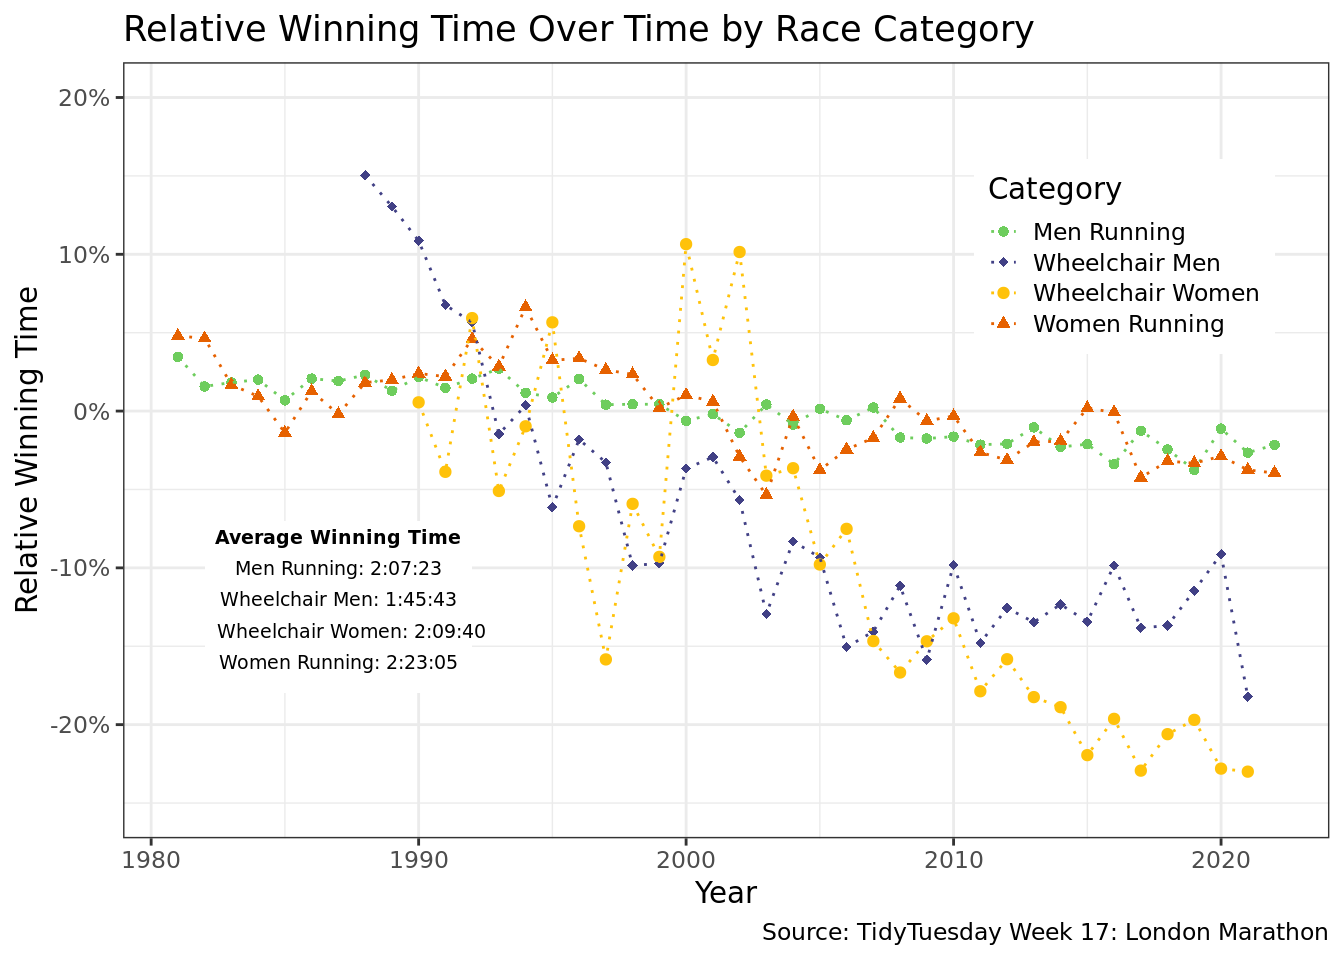 This figure is a line graph with points at each year titled “Relative Winning Time Over Time by Race Category”. Relative winning time is defined as the winning time for that year divided by the average winning time from 1981-2020. It has lines for Men’s Running, Women’s Running, Wheelchair Men and Wheelchair Women. This is a zoomed in version of the previous plot, only including relative win times under 20%. Zooming in allows us to better notice the trends of relative win times for men and women running: the relative win times trend from +5% in the beginning of the time period to nearly below 5% of the average win time.